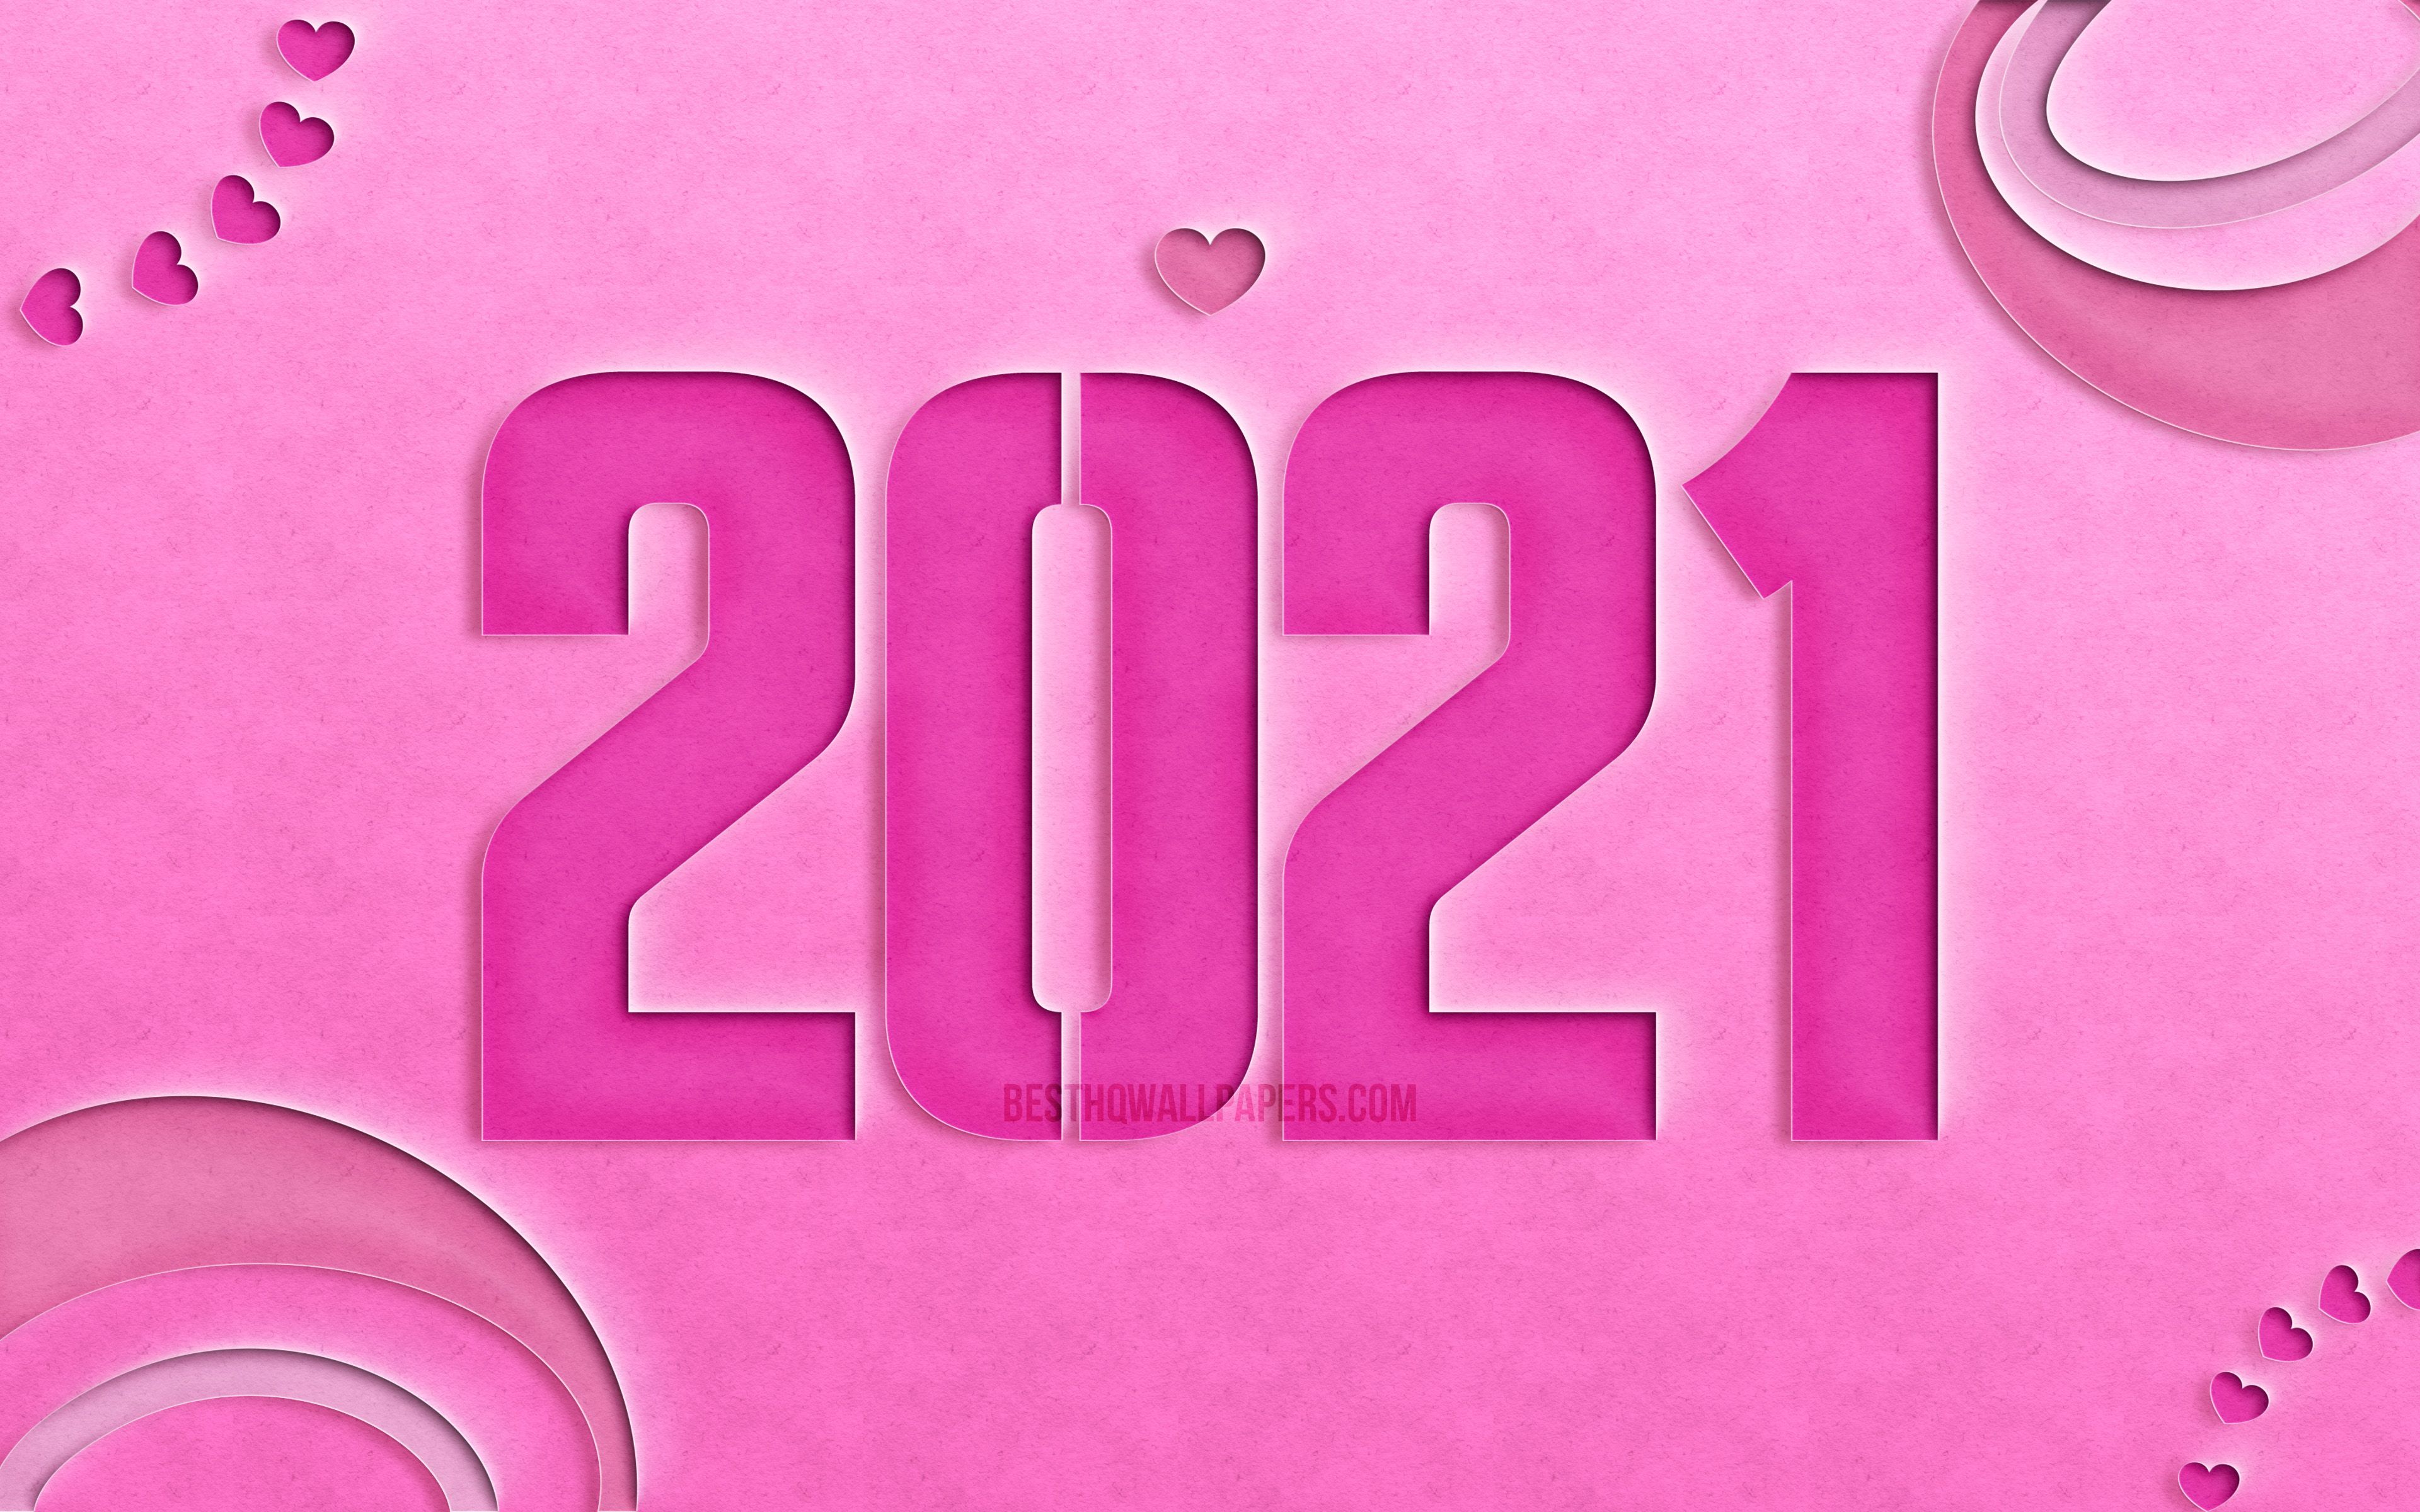 Download wallpaper 2021 new year, 4k, New Year Love creative, 2021 pink cut digits, 2021 concepts, 2021 on pink background, 2021 year digits, Happy New Year 2021 for desktop with resolution 3840x2400. High Quality HD picture wallpaper